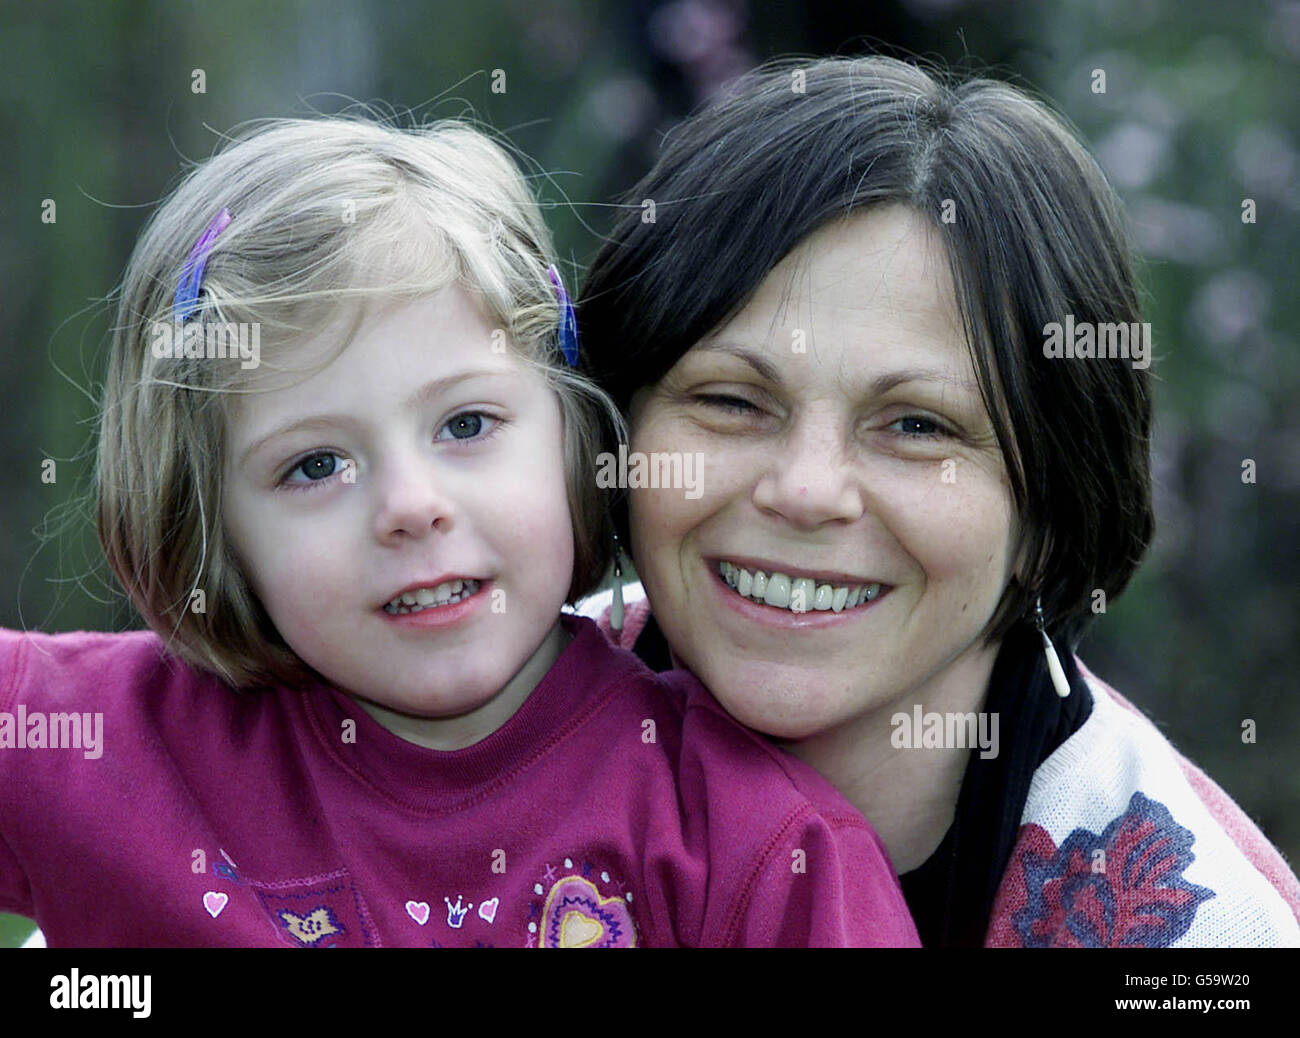 Jenny Stacey (right) and her daughter, Lucy Young, who alerted neighbours after her mother, a diabetic, collapsed upstairs in her home at Bury St Edmunds, Suffolk. The little girl flagged down a passing neighbour who promptly called an ambulance. * Paramedics arrived to find Jennny collapsed on the floor with very low blood sugar levels and administered glucose, after which she came around. Lucy was presented with a certificate by the East Anglian Ambulance Service and a junior paramedic handbook, giving practical advice on first aid. Stock Photo